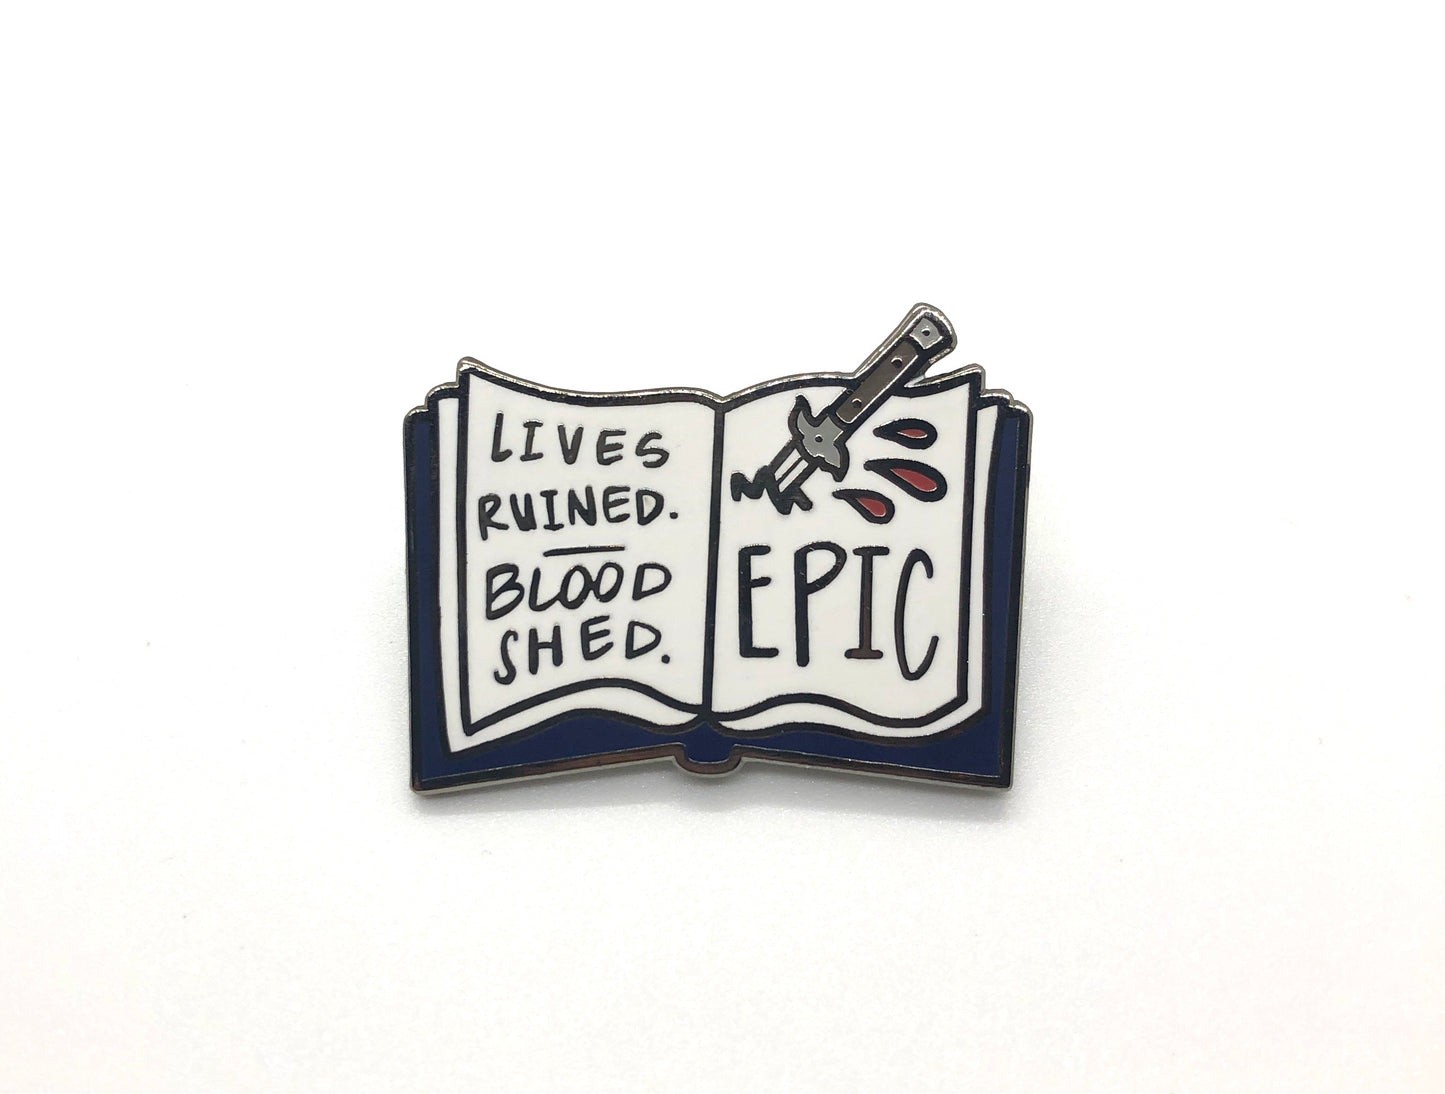 “Our Story is Epic” - Veronica Mars inspired enamel pin